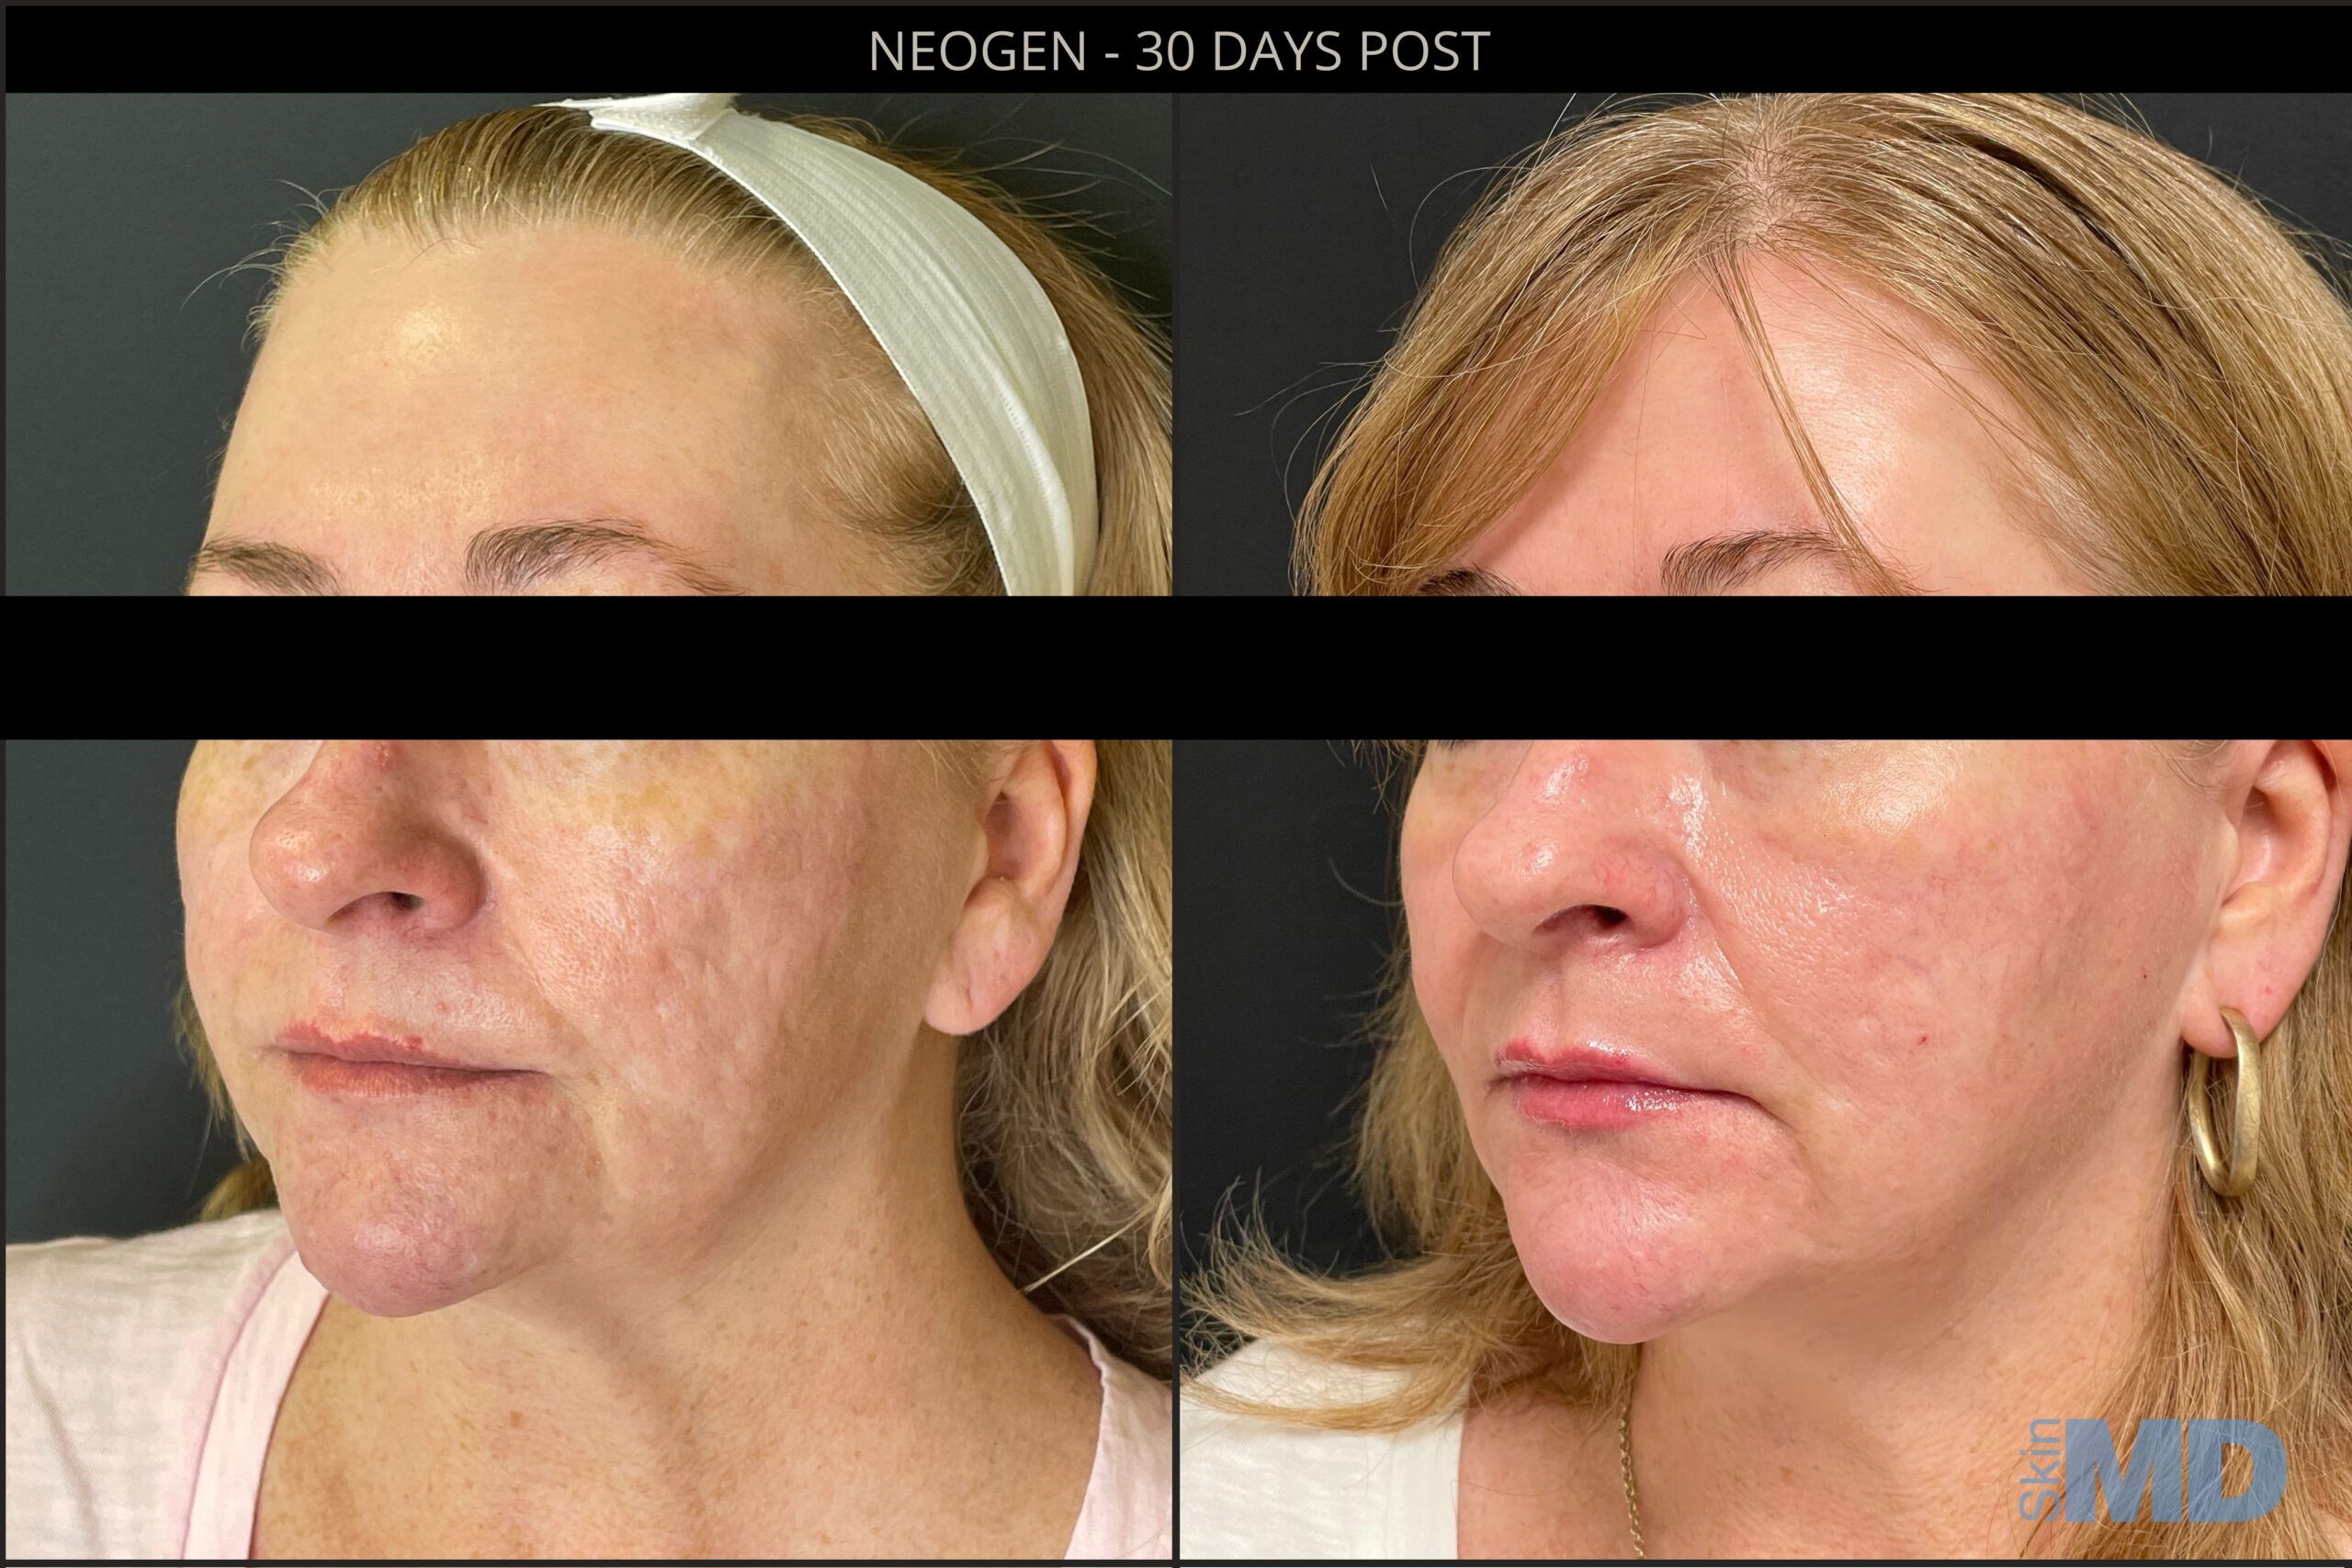 Before and after NeoGen results